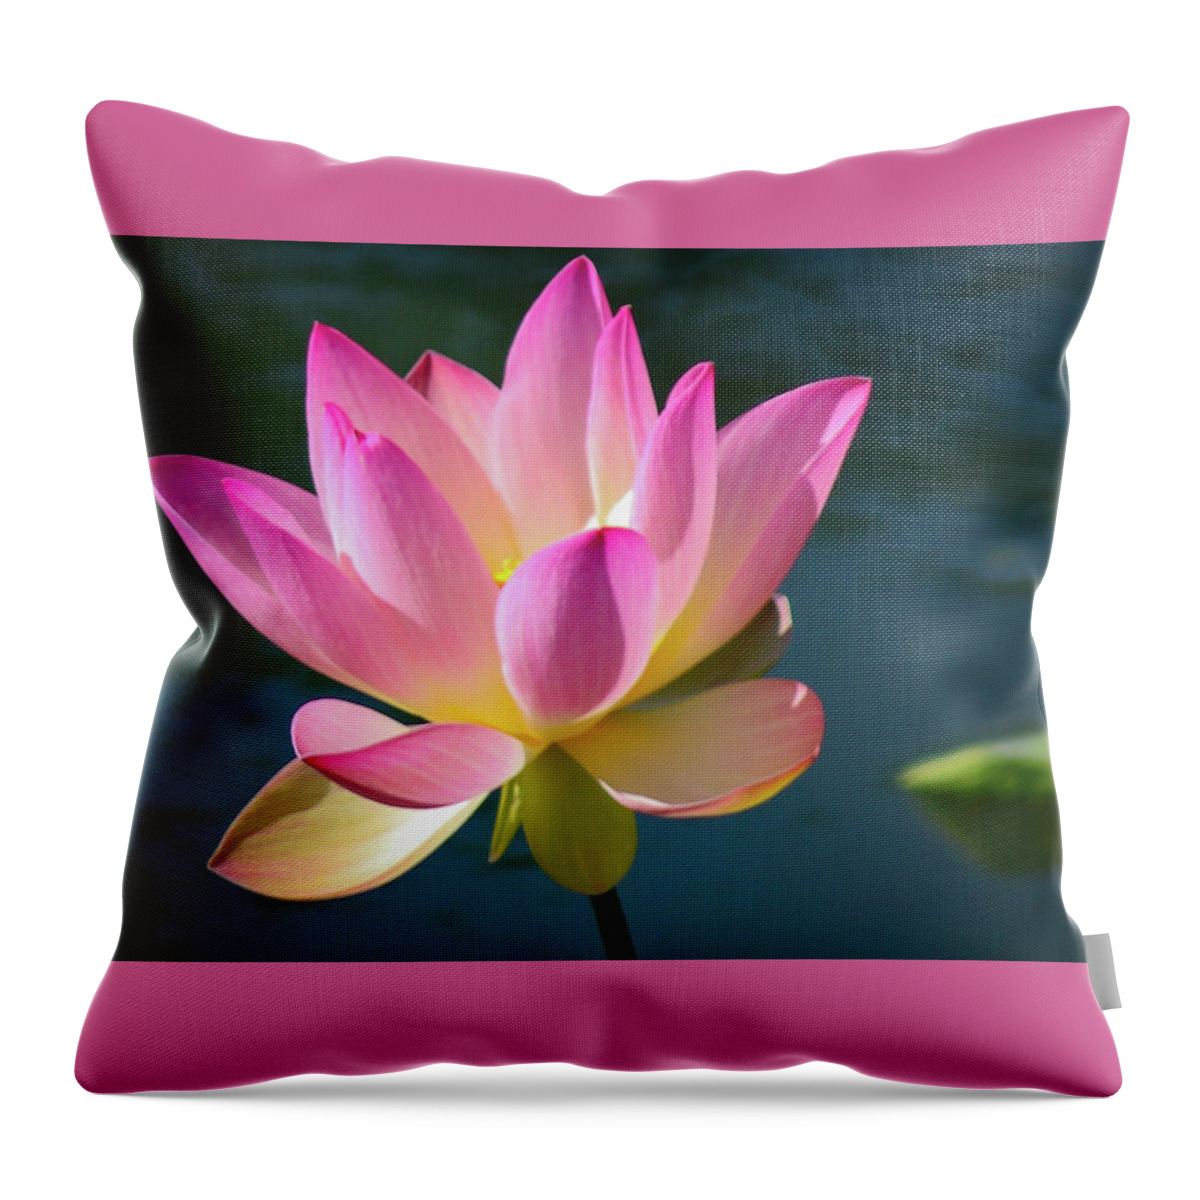 Flowers Throw Pillow featuring the photograph Pink Waterlily by Gerri Bigler